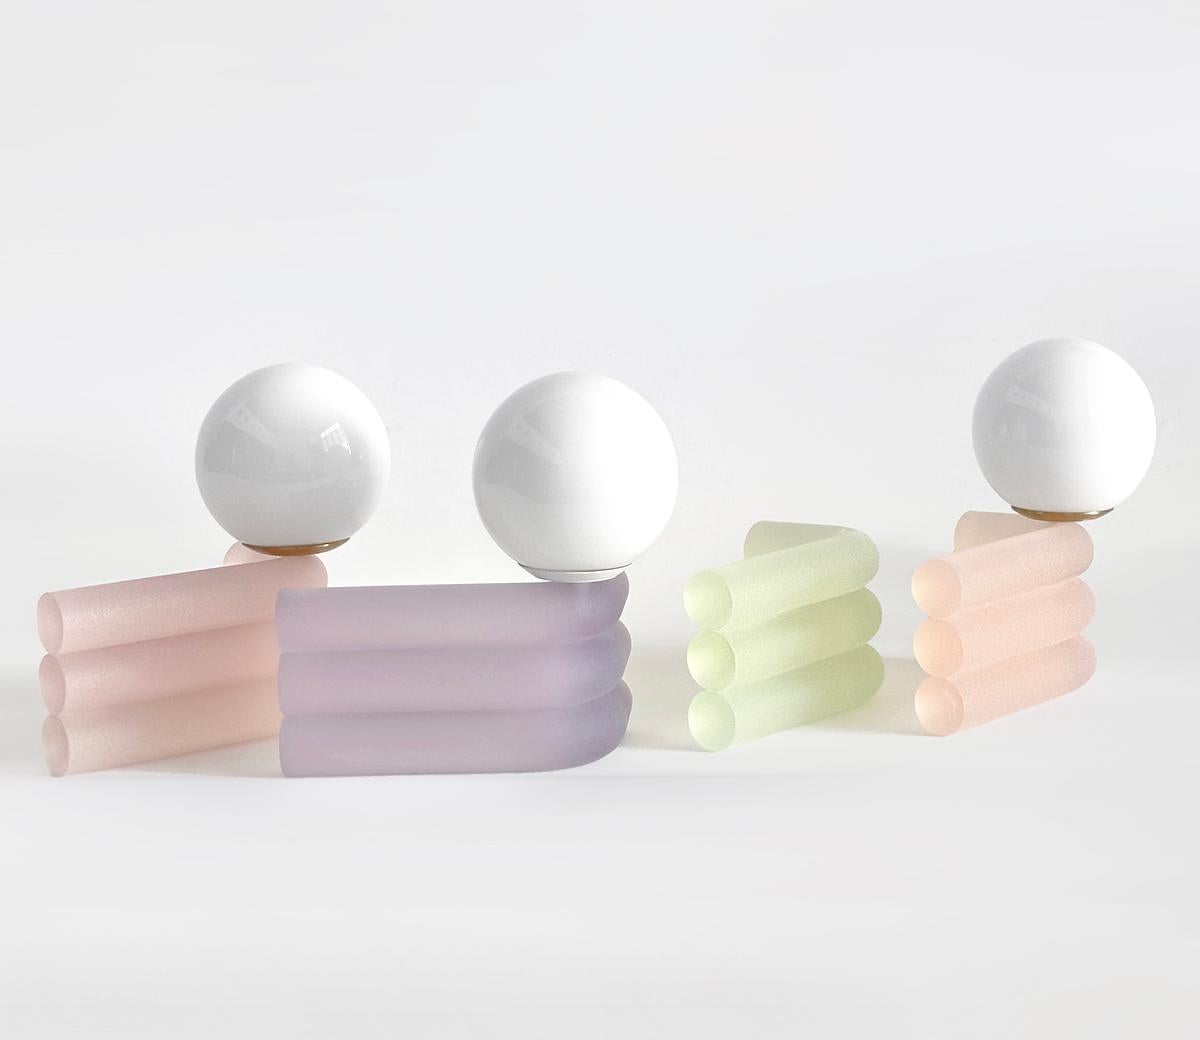 Elio lamps are stacks of translucent, tubular cast-resin that create a diffused glow, with frosted sugar jellies as a visual reference. The lamp's singular bend is a small ode to Eileen Gray’s Bibendum lounge. Integrated with smart wifi devices,